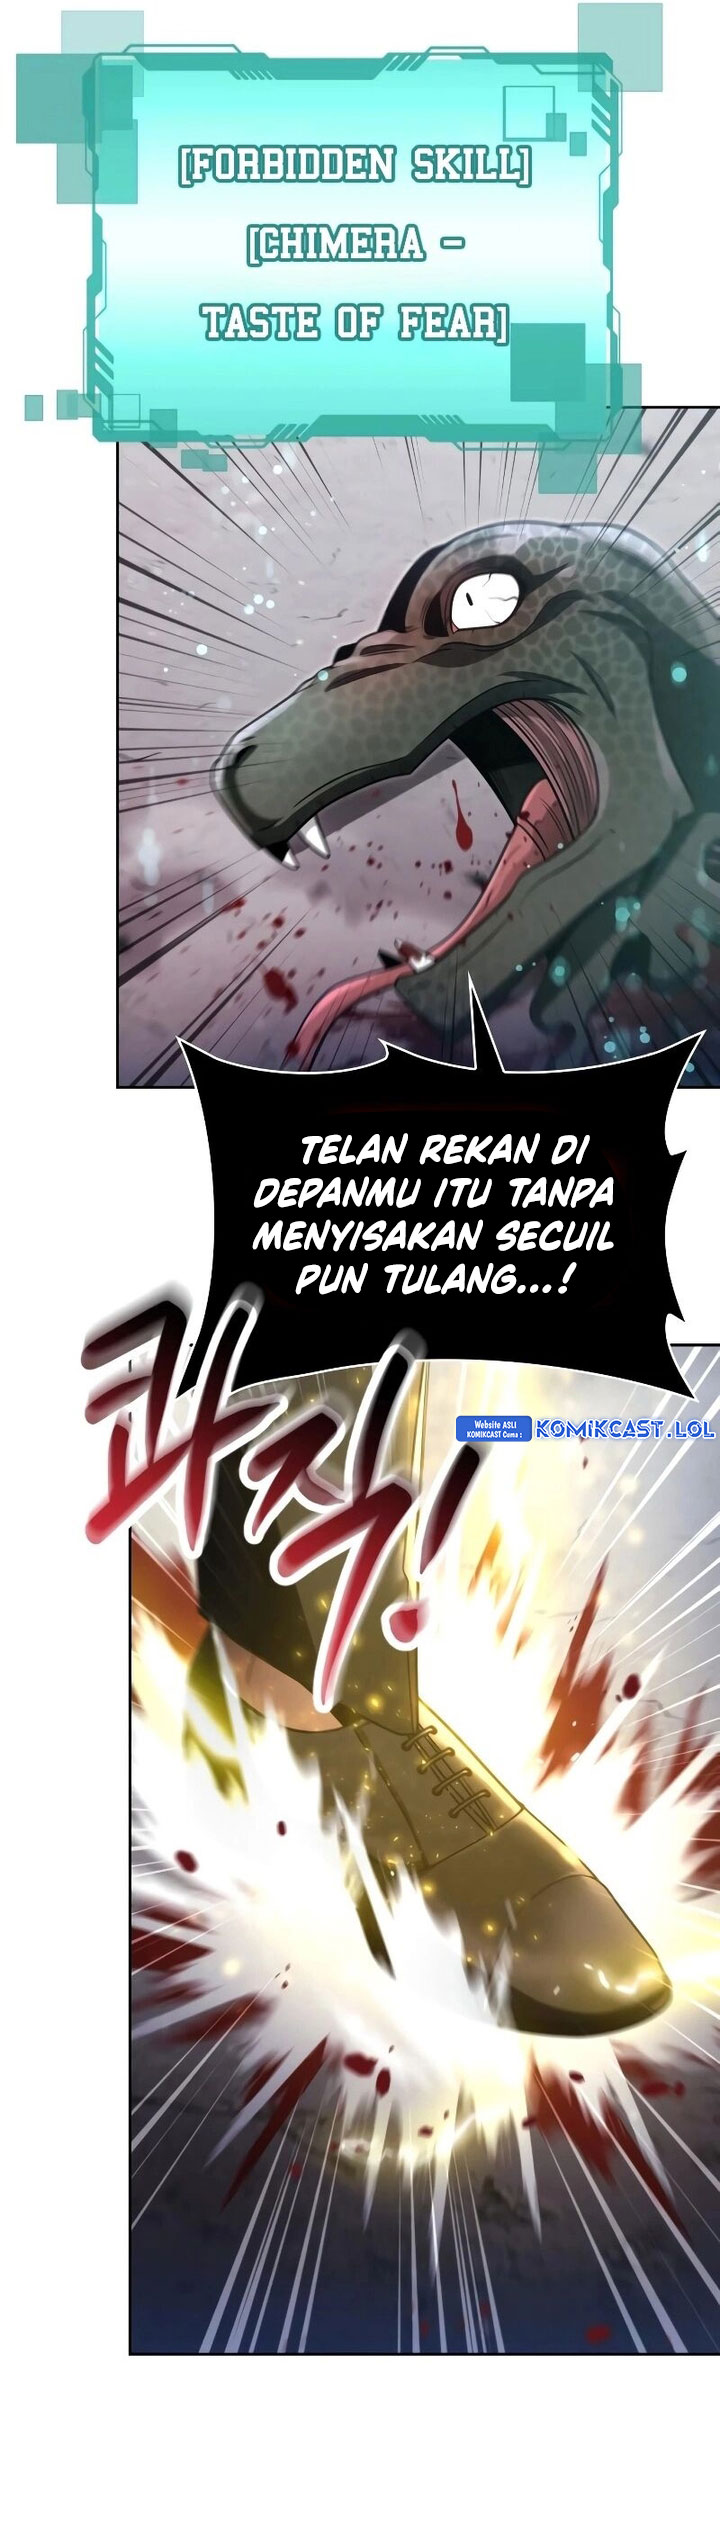 Dilarang COPAS - situs resmi www.mangacanblog.com - Komik clever cleaning life of the returned genius hunter 065 - chapter 65 66 Indonesia clever cleaning life of the returned genius hunter 065 - chapter 65 Terbaru 52|Baca Manga Komik Indonesia|Mangacan